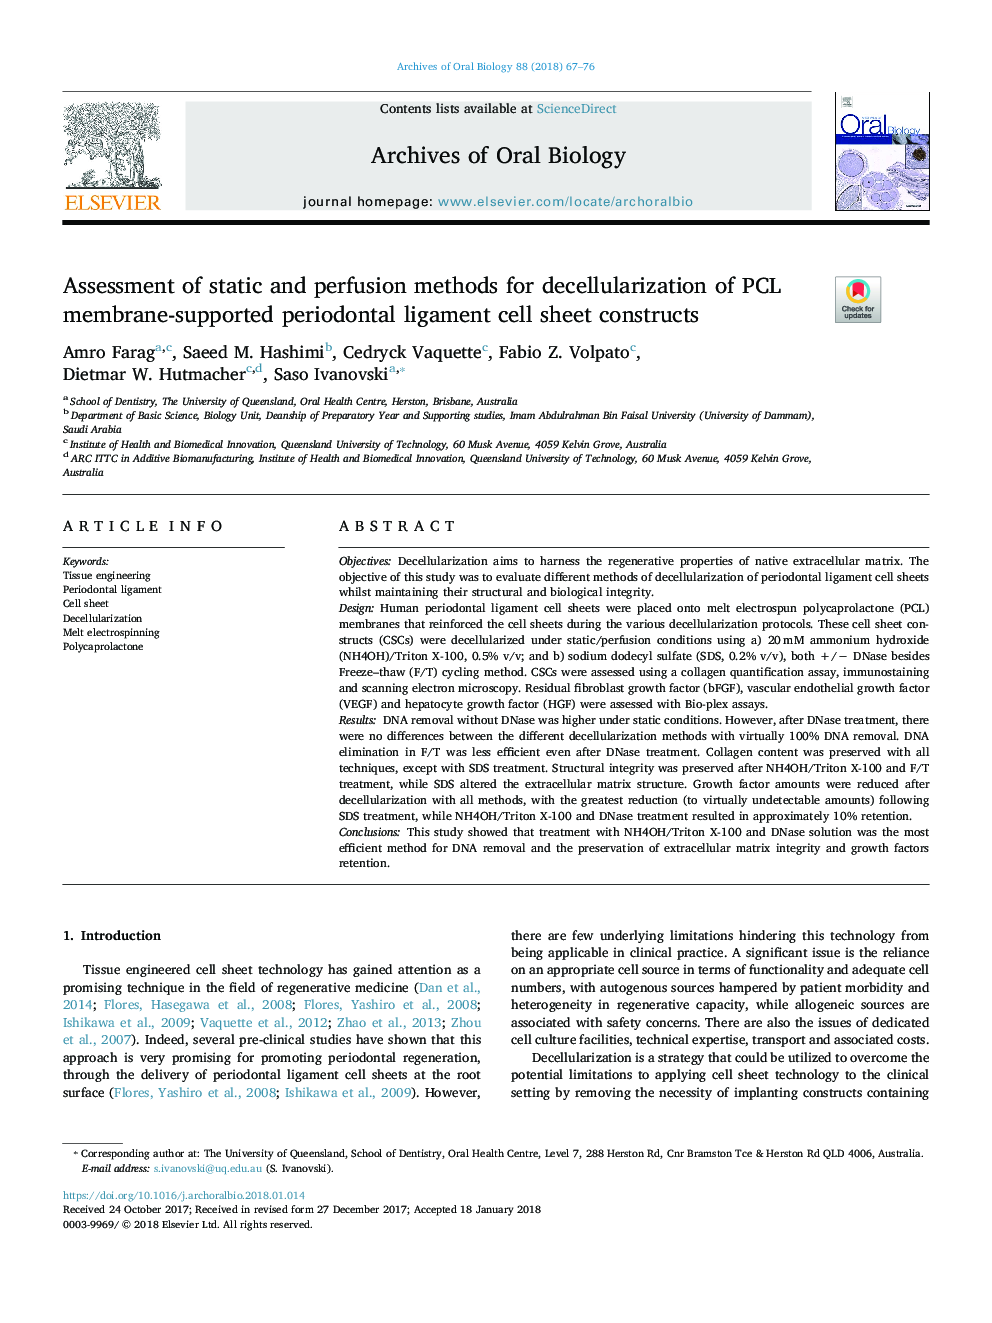 Assessment of static and perfusion methods for decellularization of PCL membrane-supported periodontal ligament cell sheet constructs